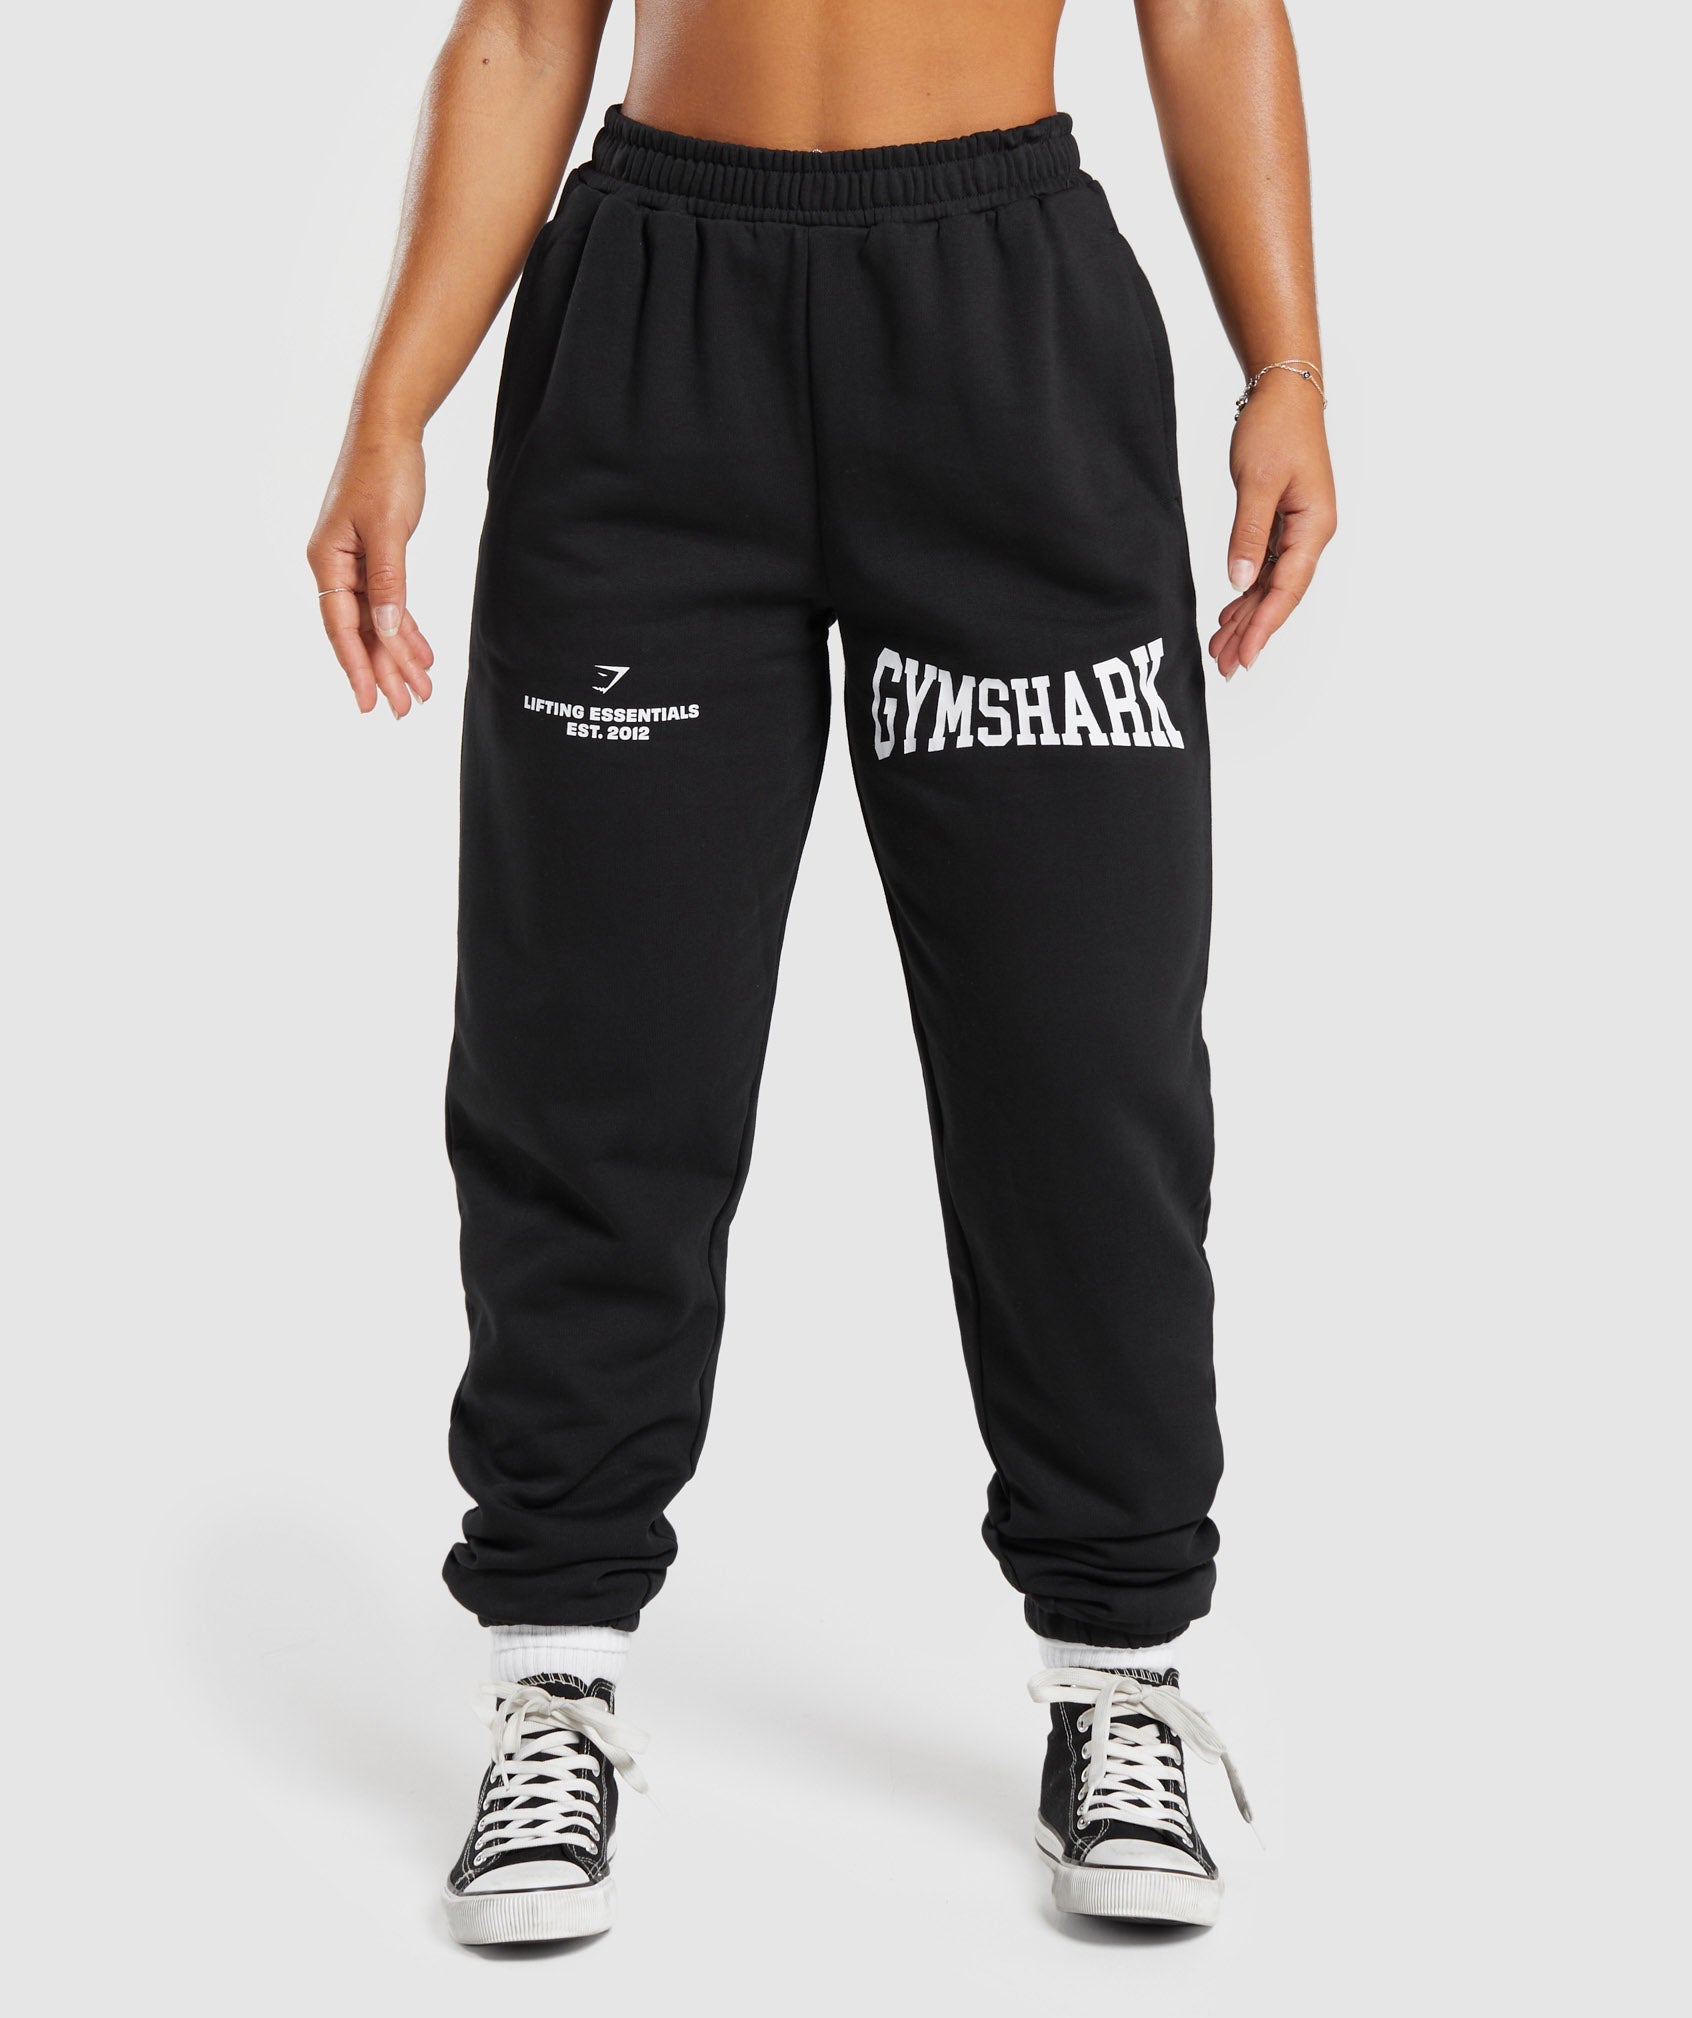 Lifting Essentials Graphic Joggers in {{variantColor} is out of stock